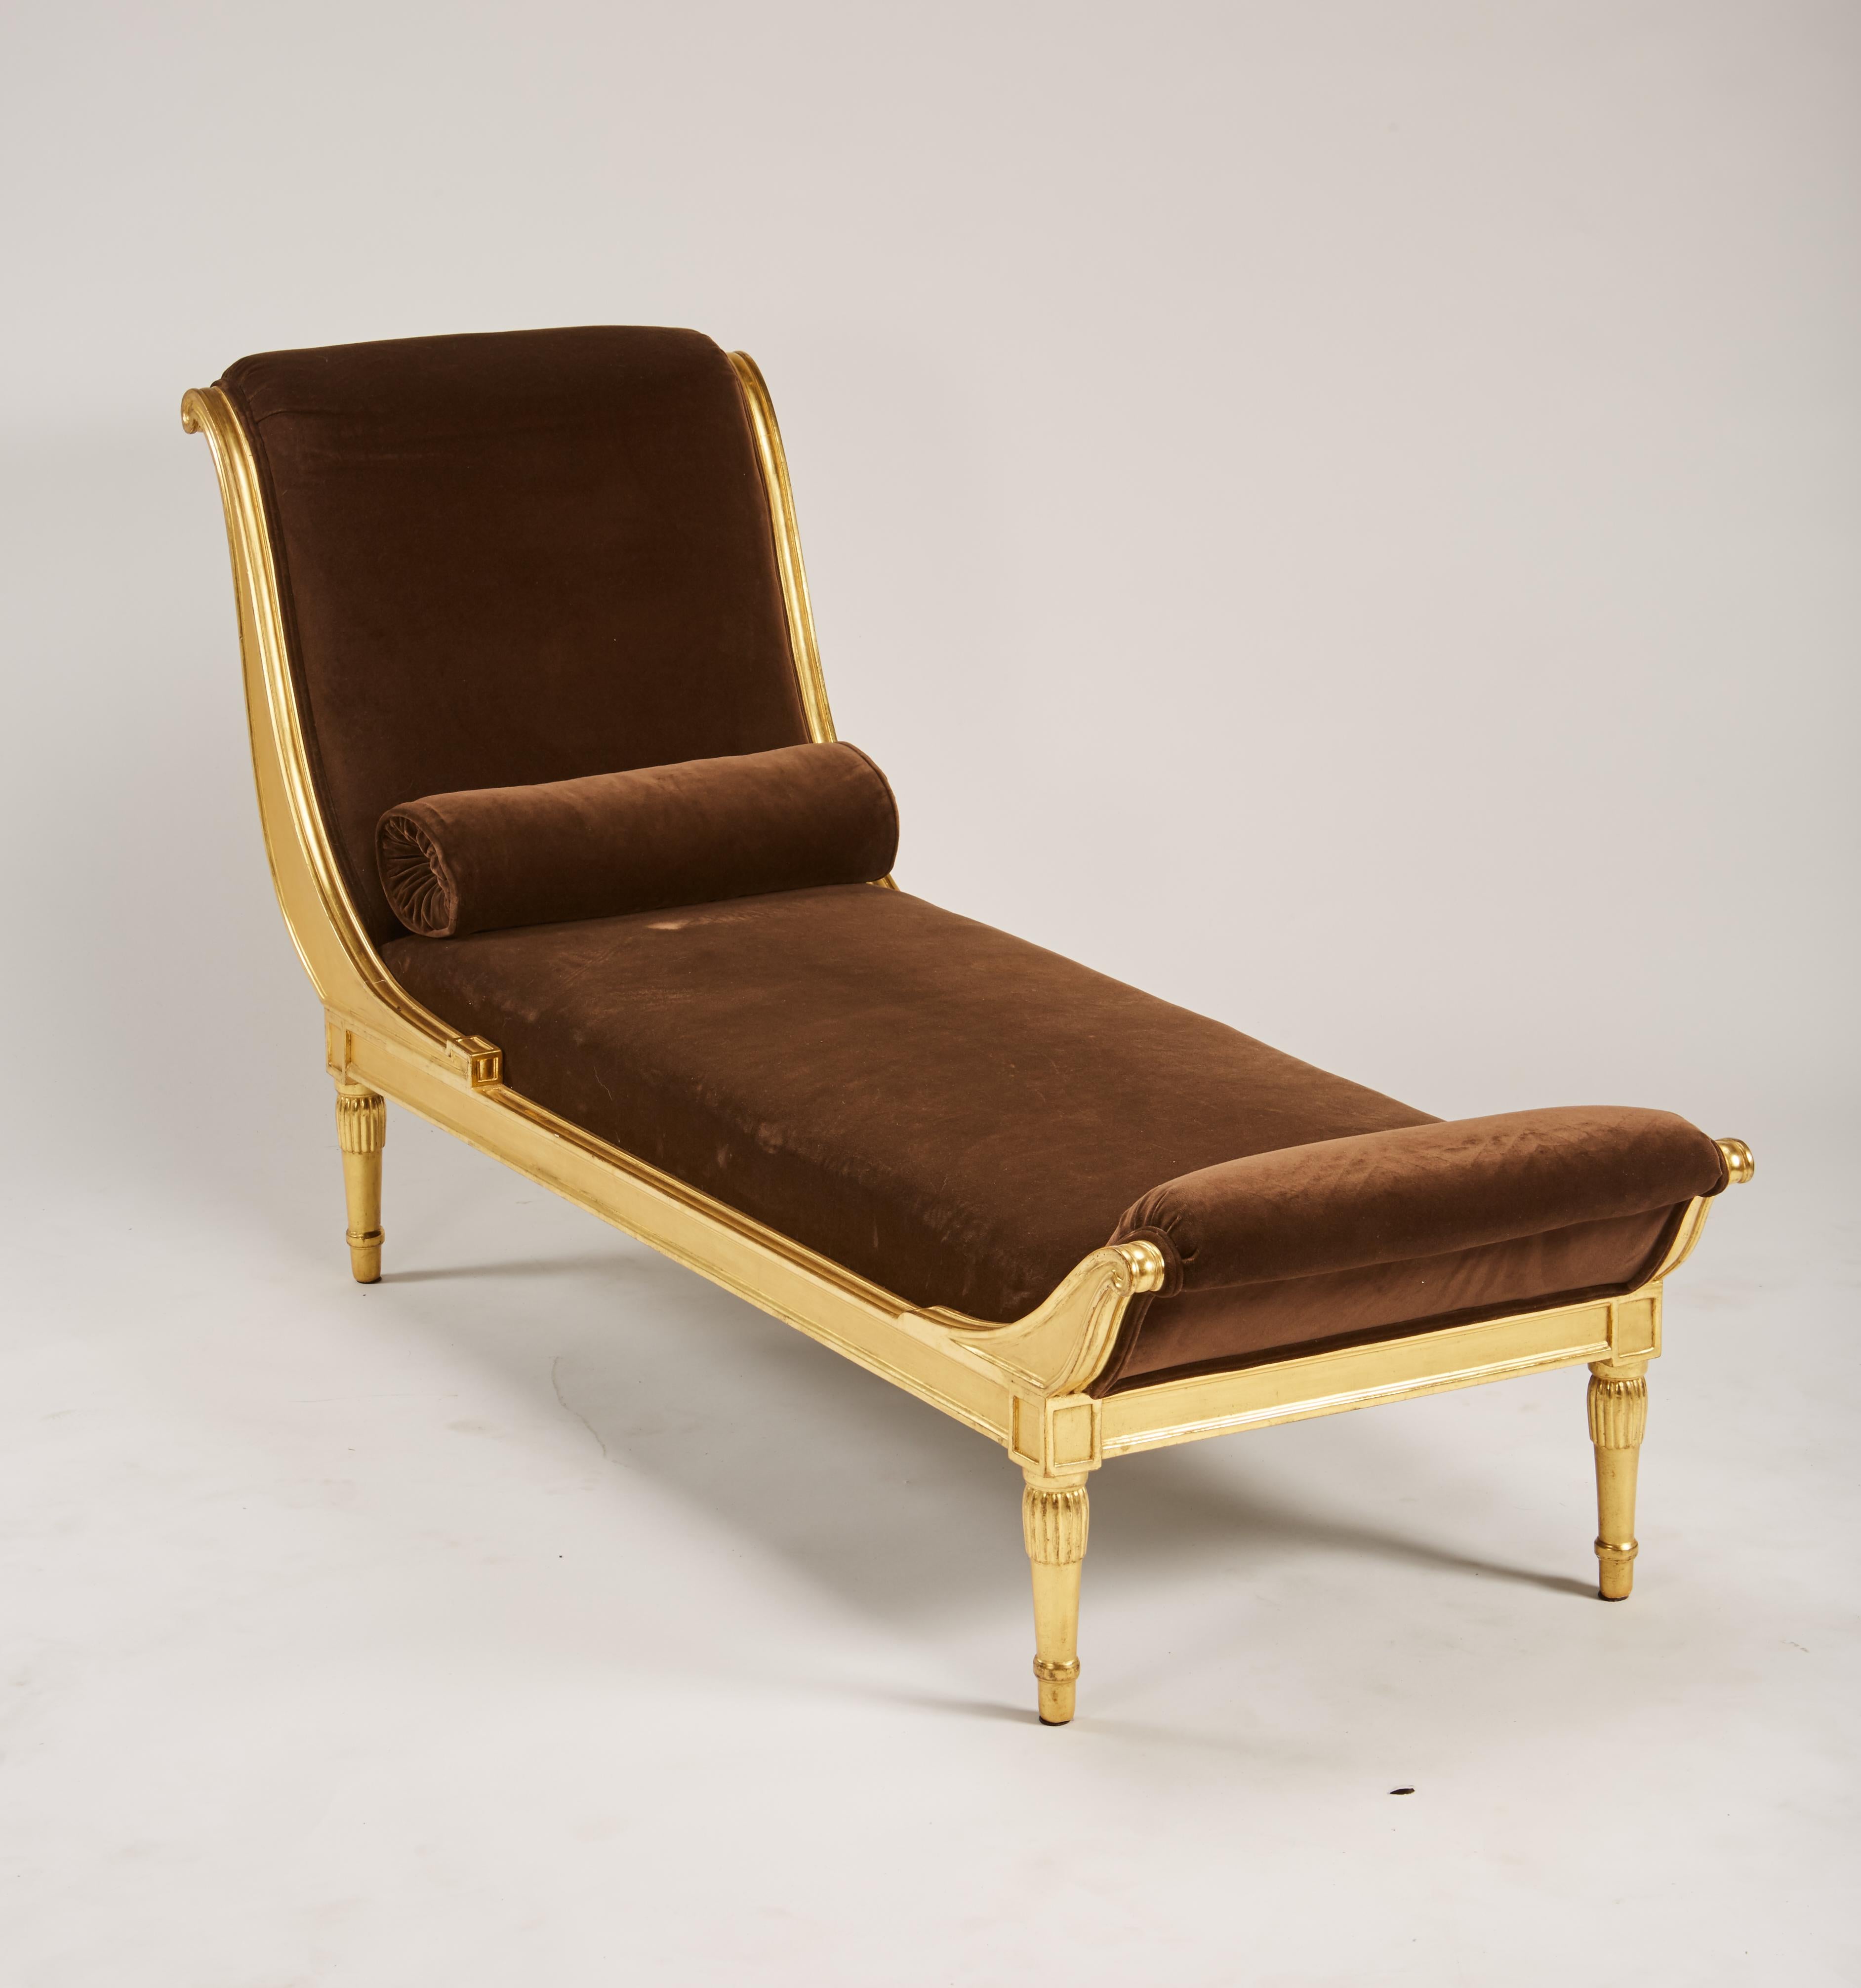 Rare and elegant Charlotte Chauchet-Guilleré for Atelier Primavera, circa 1920 giltwood chaise lounge with older brown velvet upholstery. Wear to gilt in areas, some marks to velvet. Provenance Christie's NYC. Note one should have a plaque from